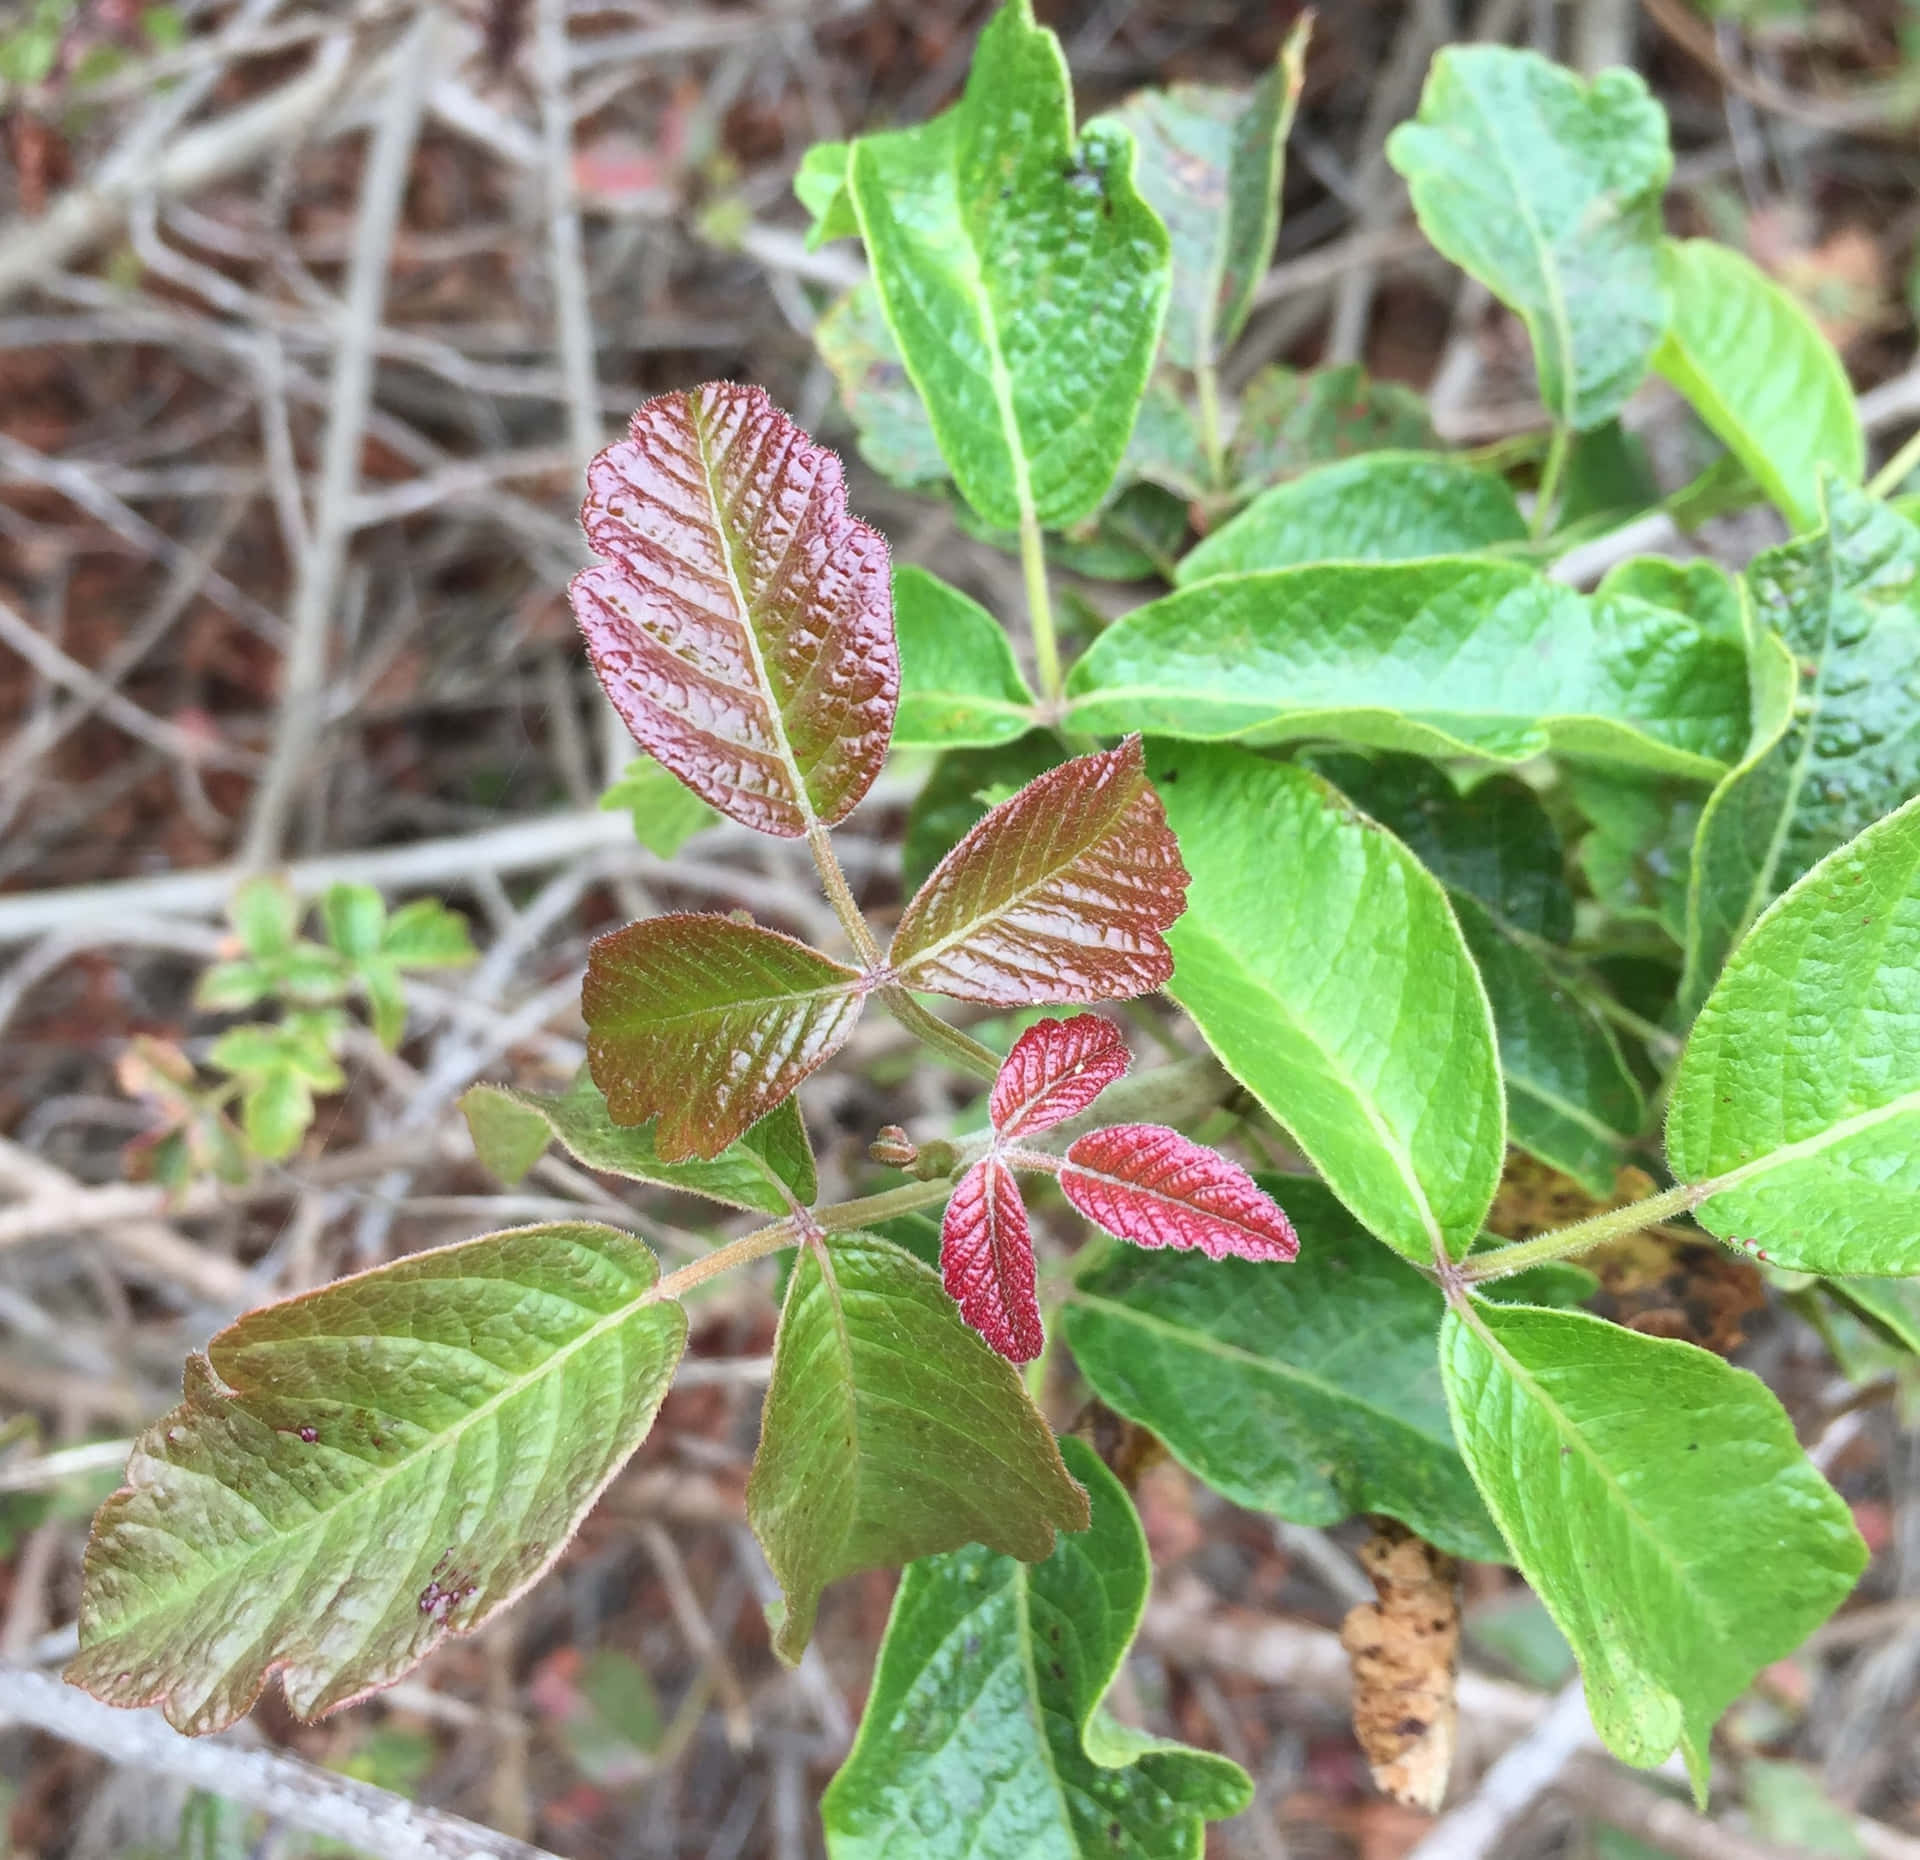 Detail of Poison Oak Leafs in High-Resolution